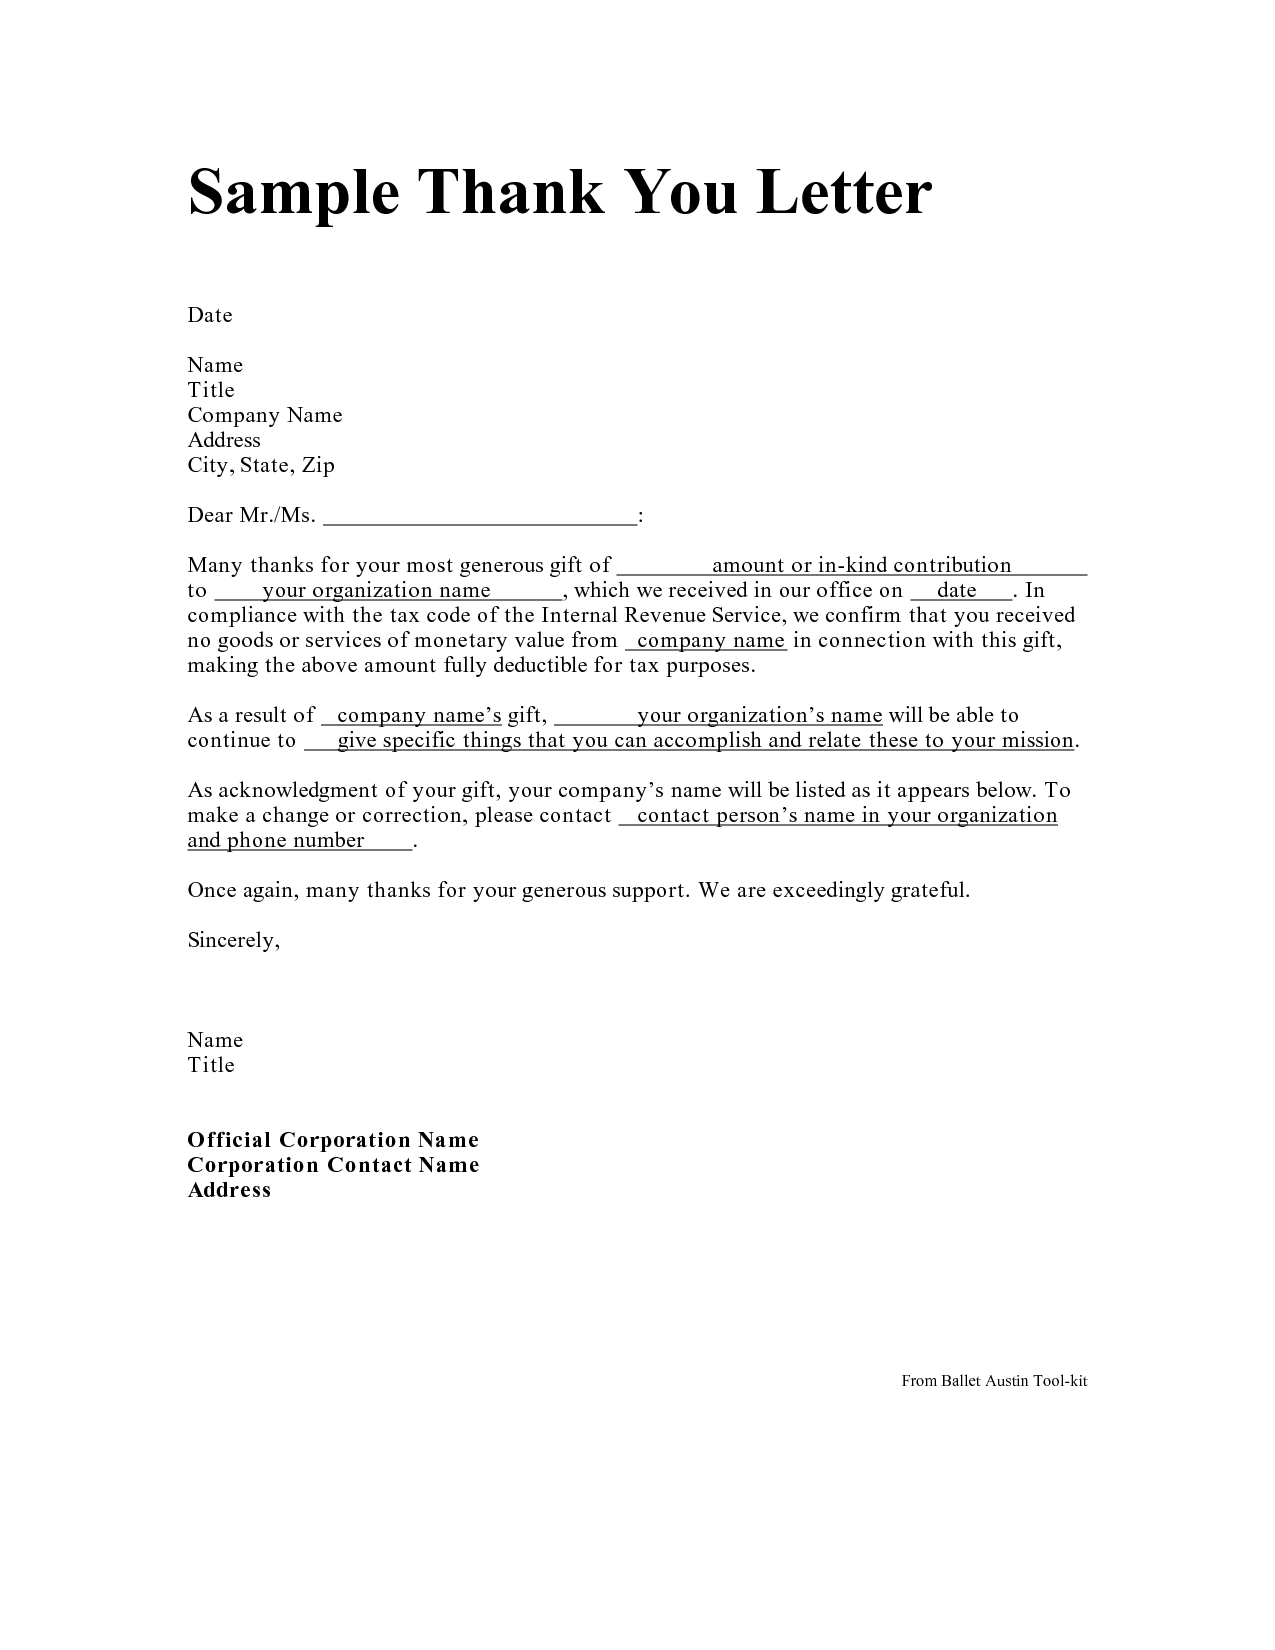 Donation Letter Template for Tax Purposes - Personal Thank You Letter Personal Thank You Letter Samples